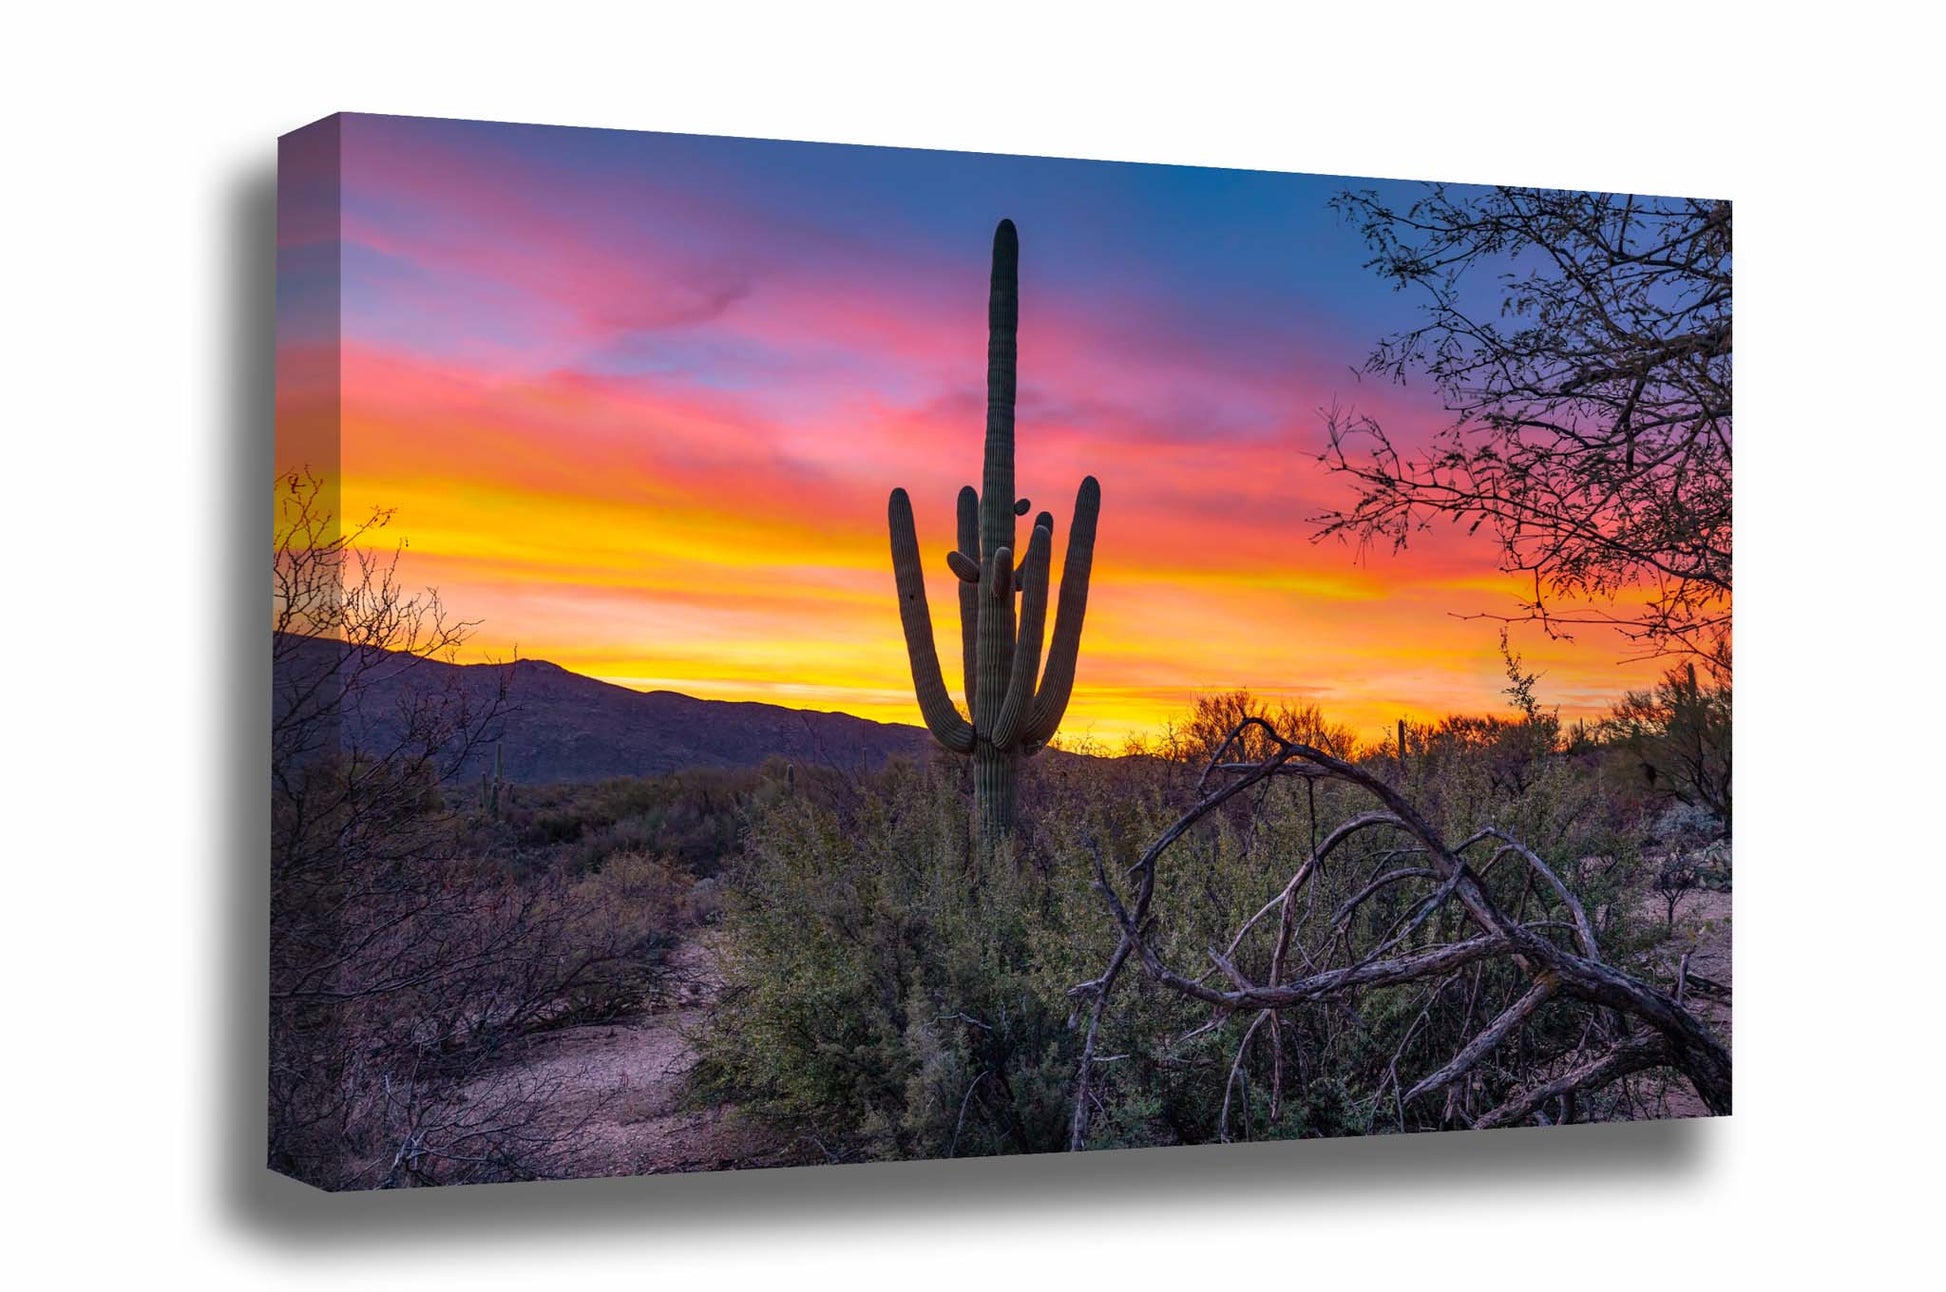 Western canvas wall art of a saguaro cactus standing tall during a vibrant sunrise in the Sonoran Desert near Tucson, Arizona by Sean Ramsey of Southern Plains Photography.